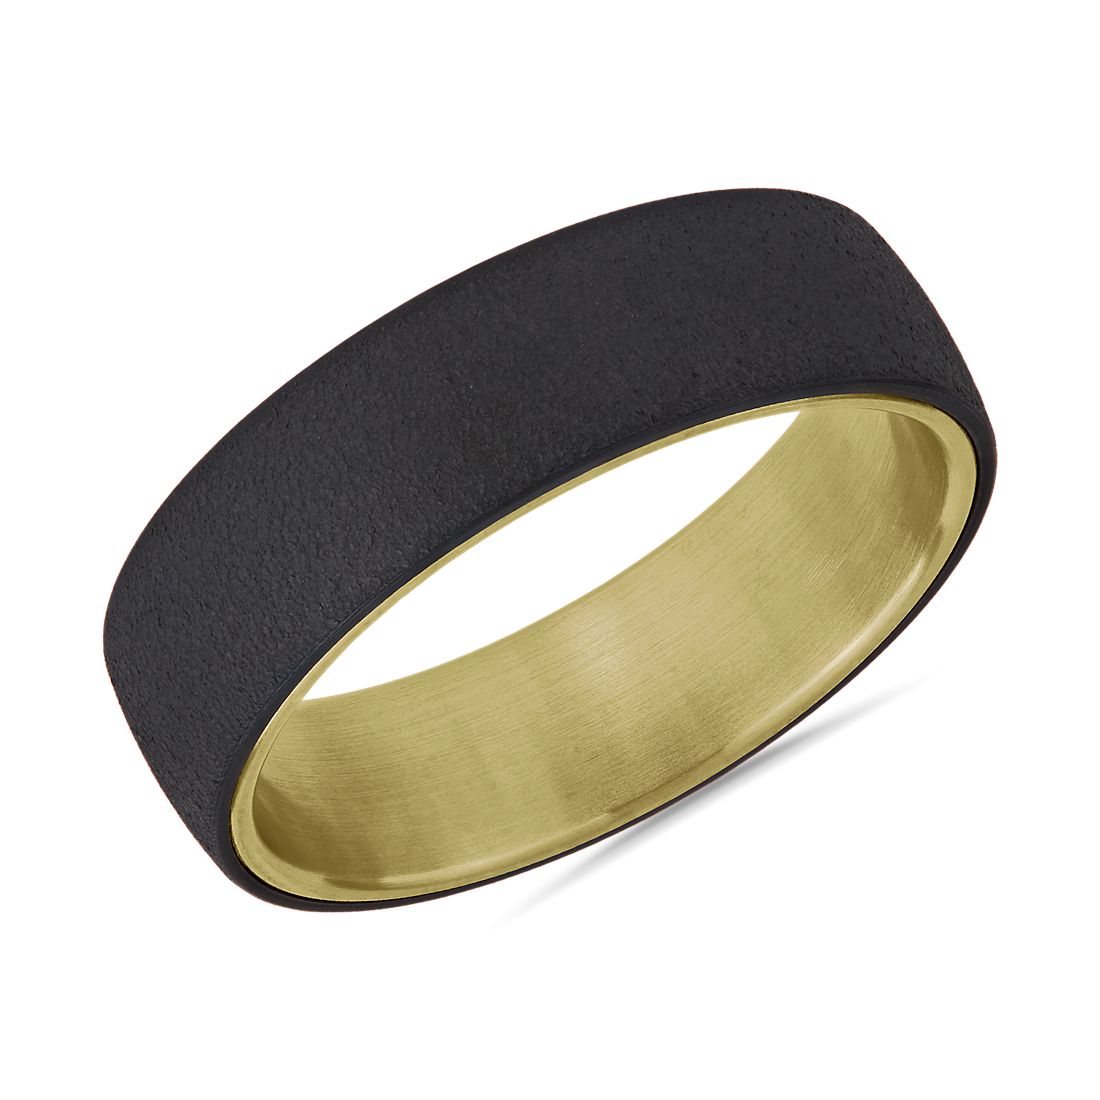 Two-Tone Stone Finish Wedding Ring in Tantalum and 14k Yellow Gold (6.5 mm)